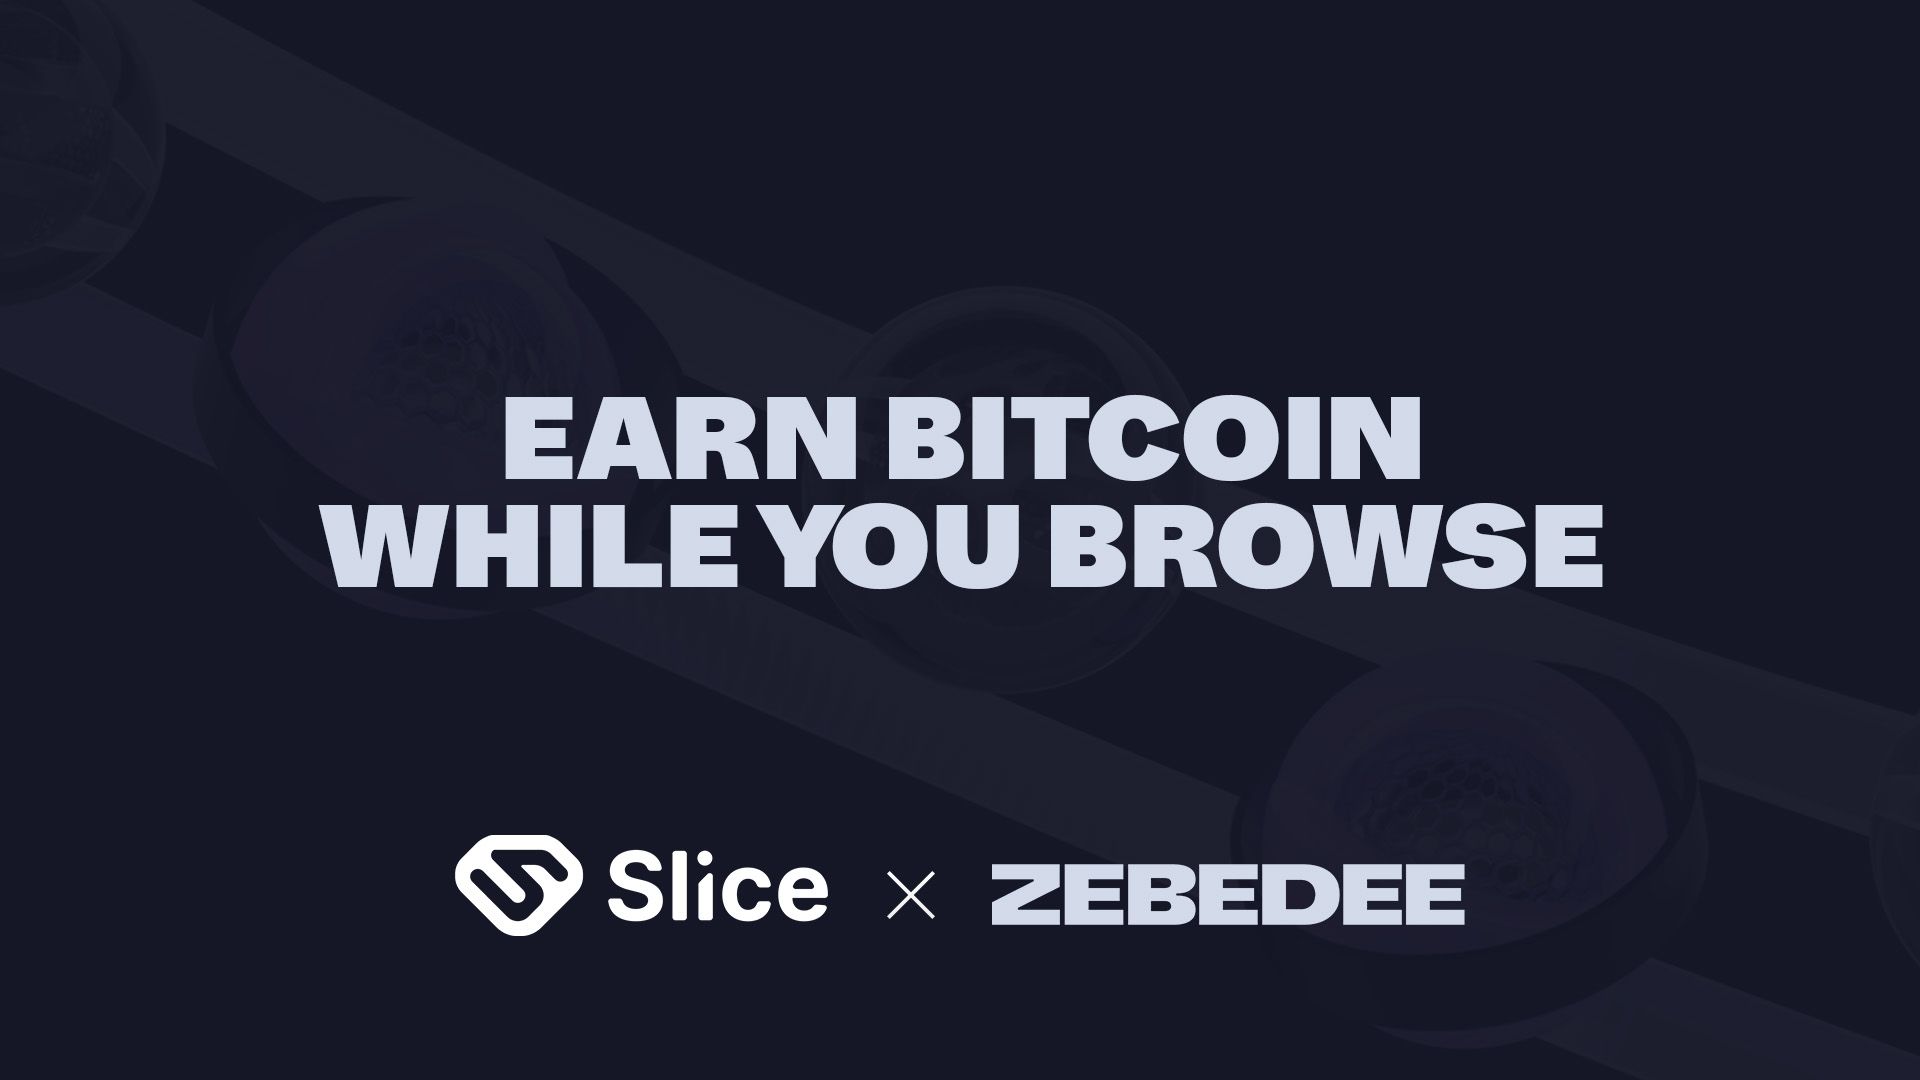 Earn Bitcoin with Slice and withdraw it to ZEBEDEE.